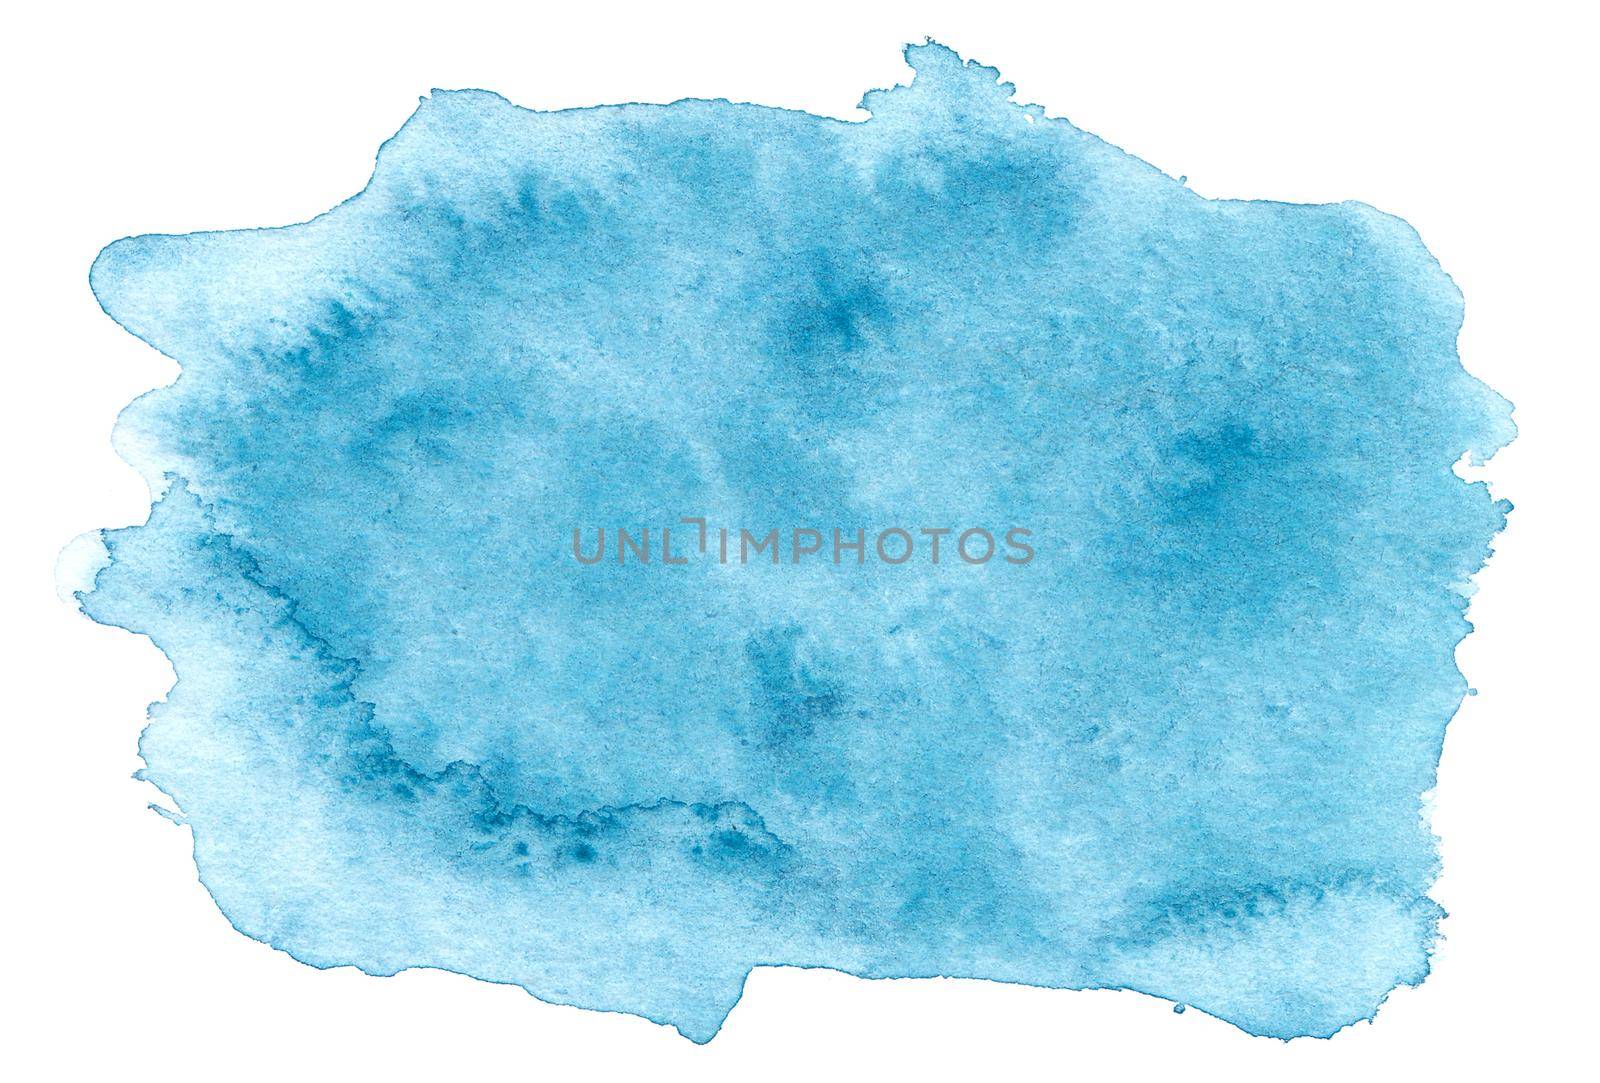 Abstract blue watercolor splash texture isolated on white background. Bright baby blue paint stain drops. Abstract illustration, banner, poster for text, decoration element